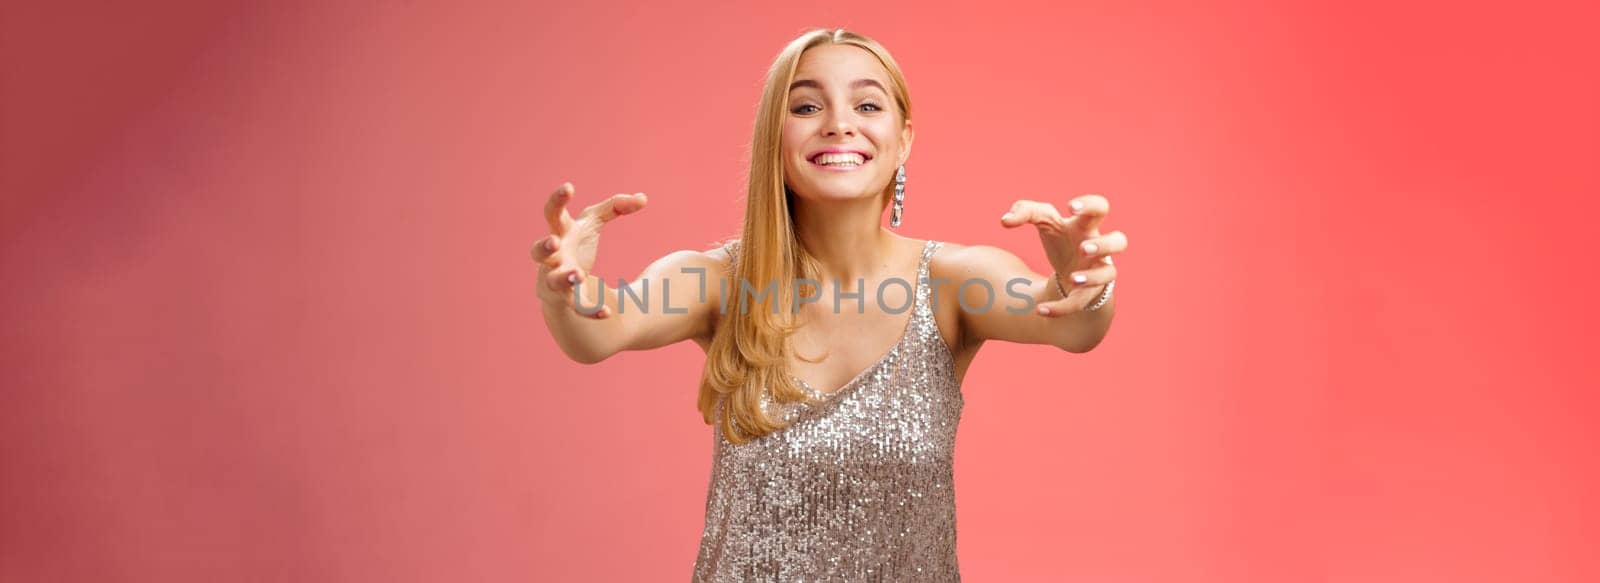 Excited obsessed attractive crazy blond woman in glamour silver dress smiling weird thrilled stretch hands like claws wanna embrace hug ex-boyfriend being clingy, standing red background.